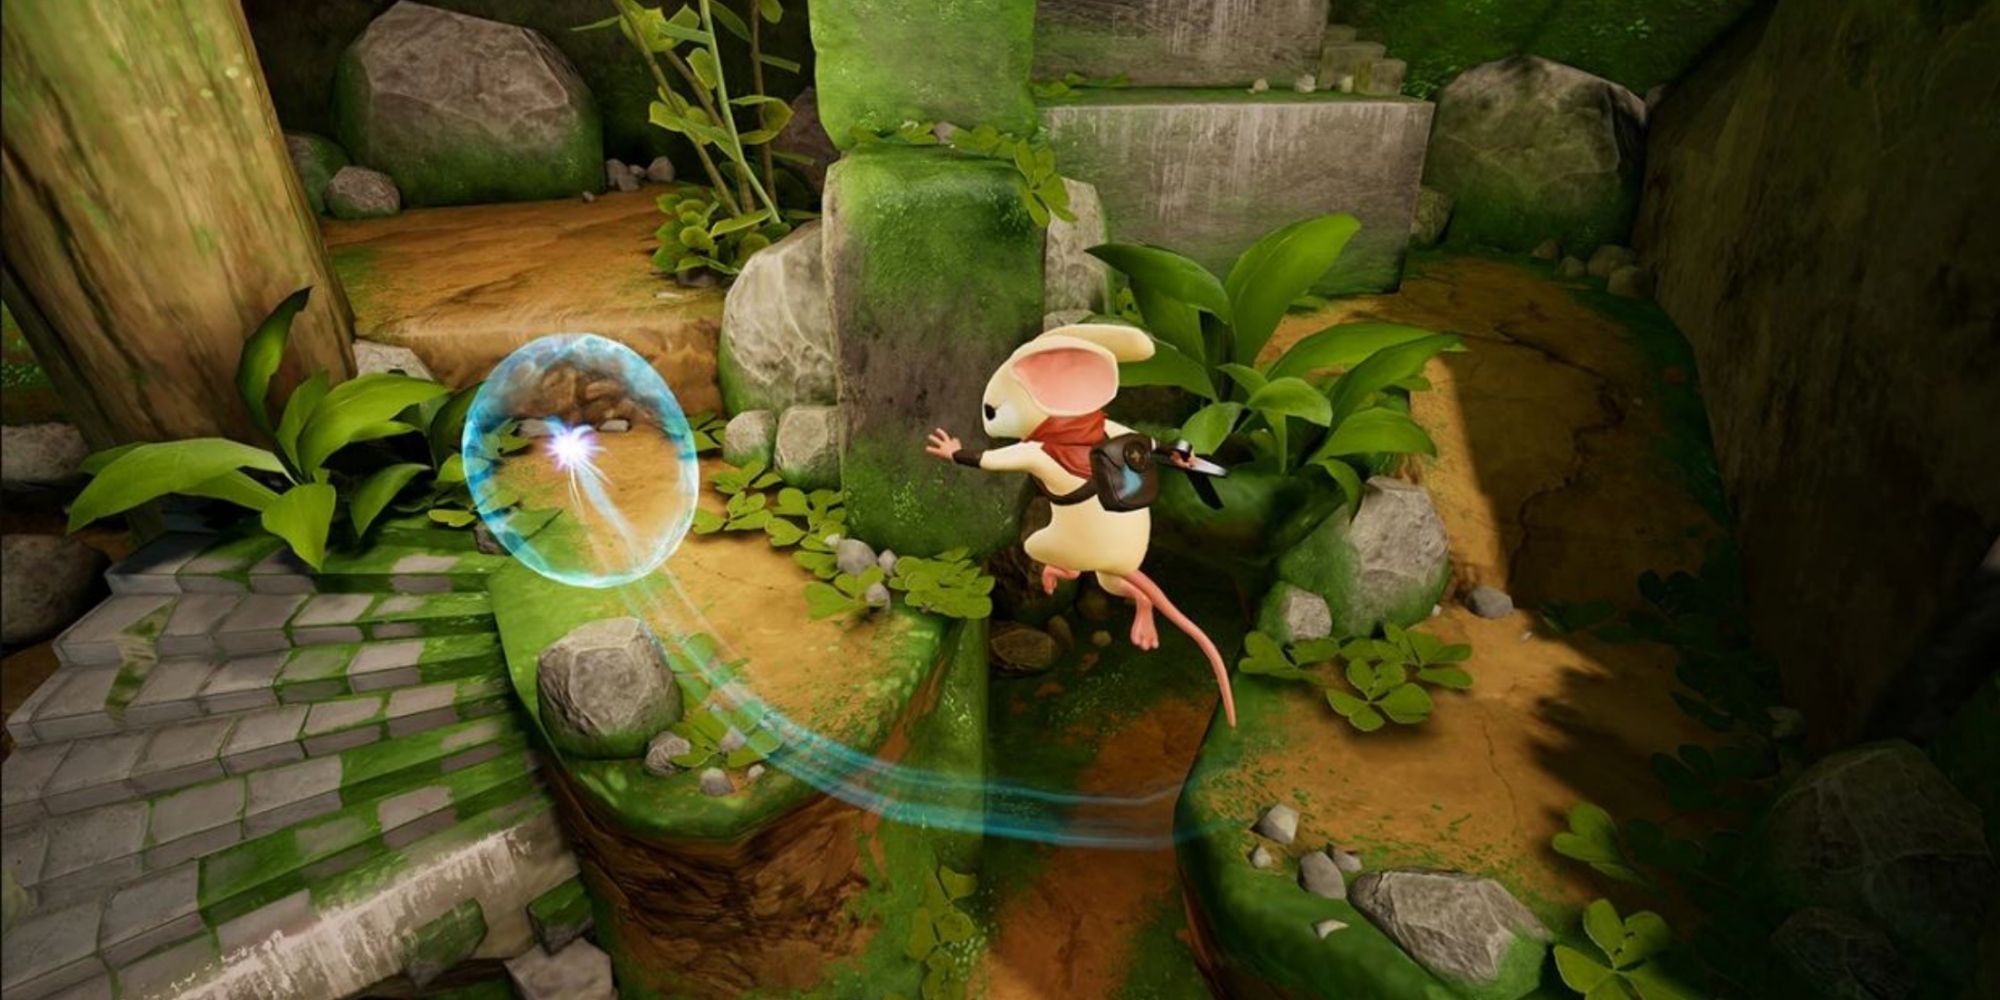 A mouse leaps across a gap in a overgrown ruins following a glowing orb